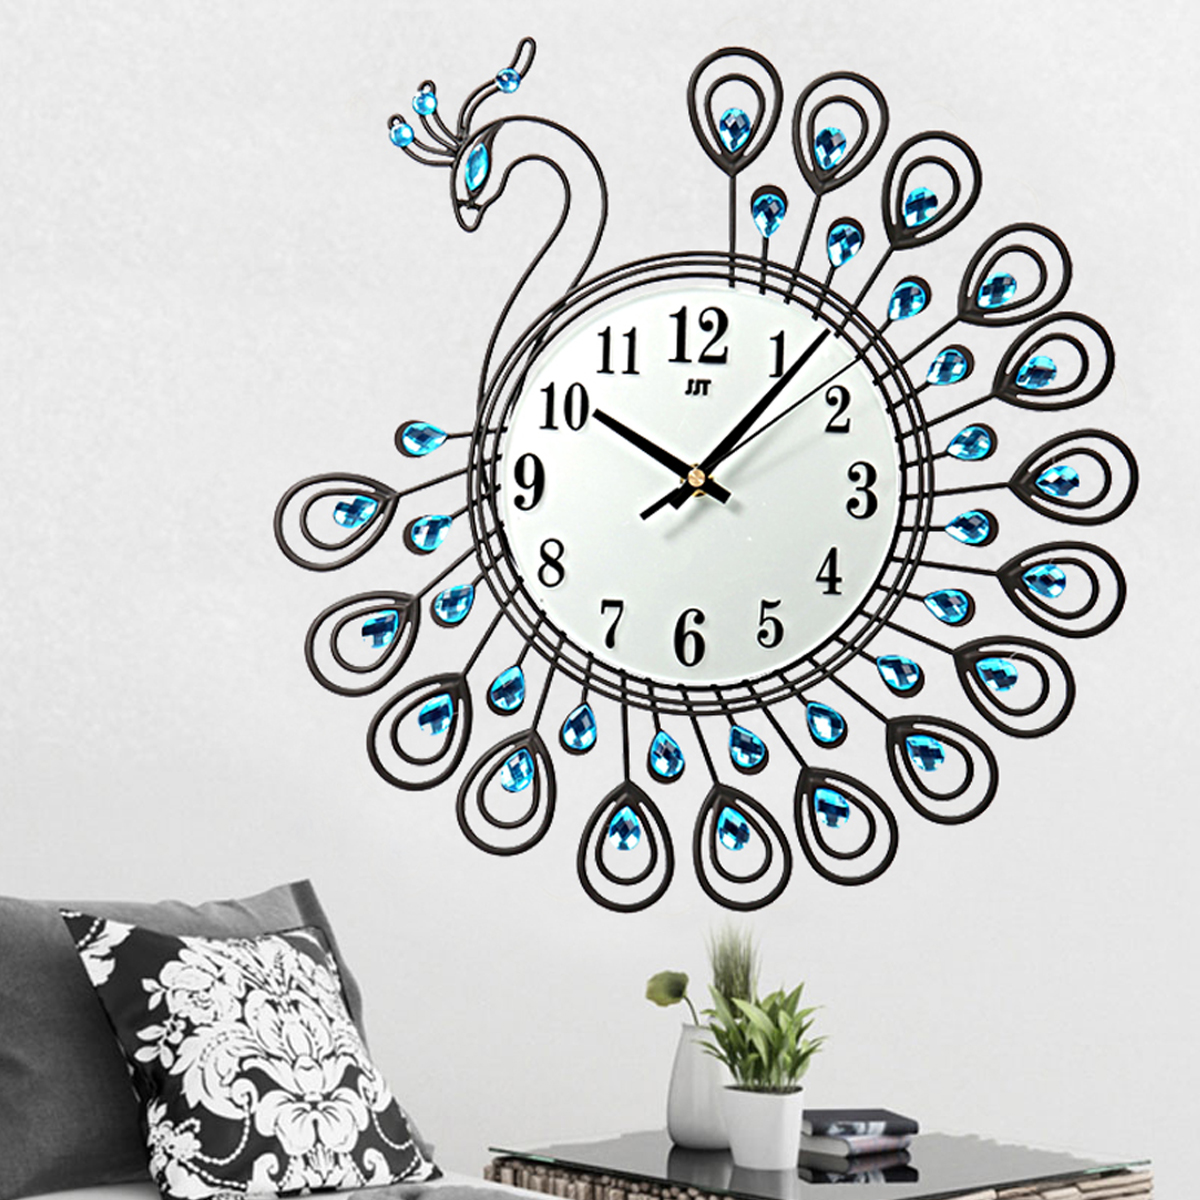 Large 3D Gold Diamond Peacock Wall Clock Metal Watch For Home Living Room Decoration DIY Clocks Crafts Ornaments Gift